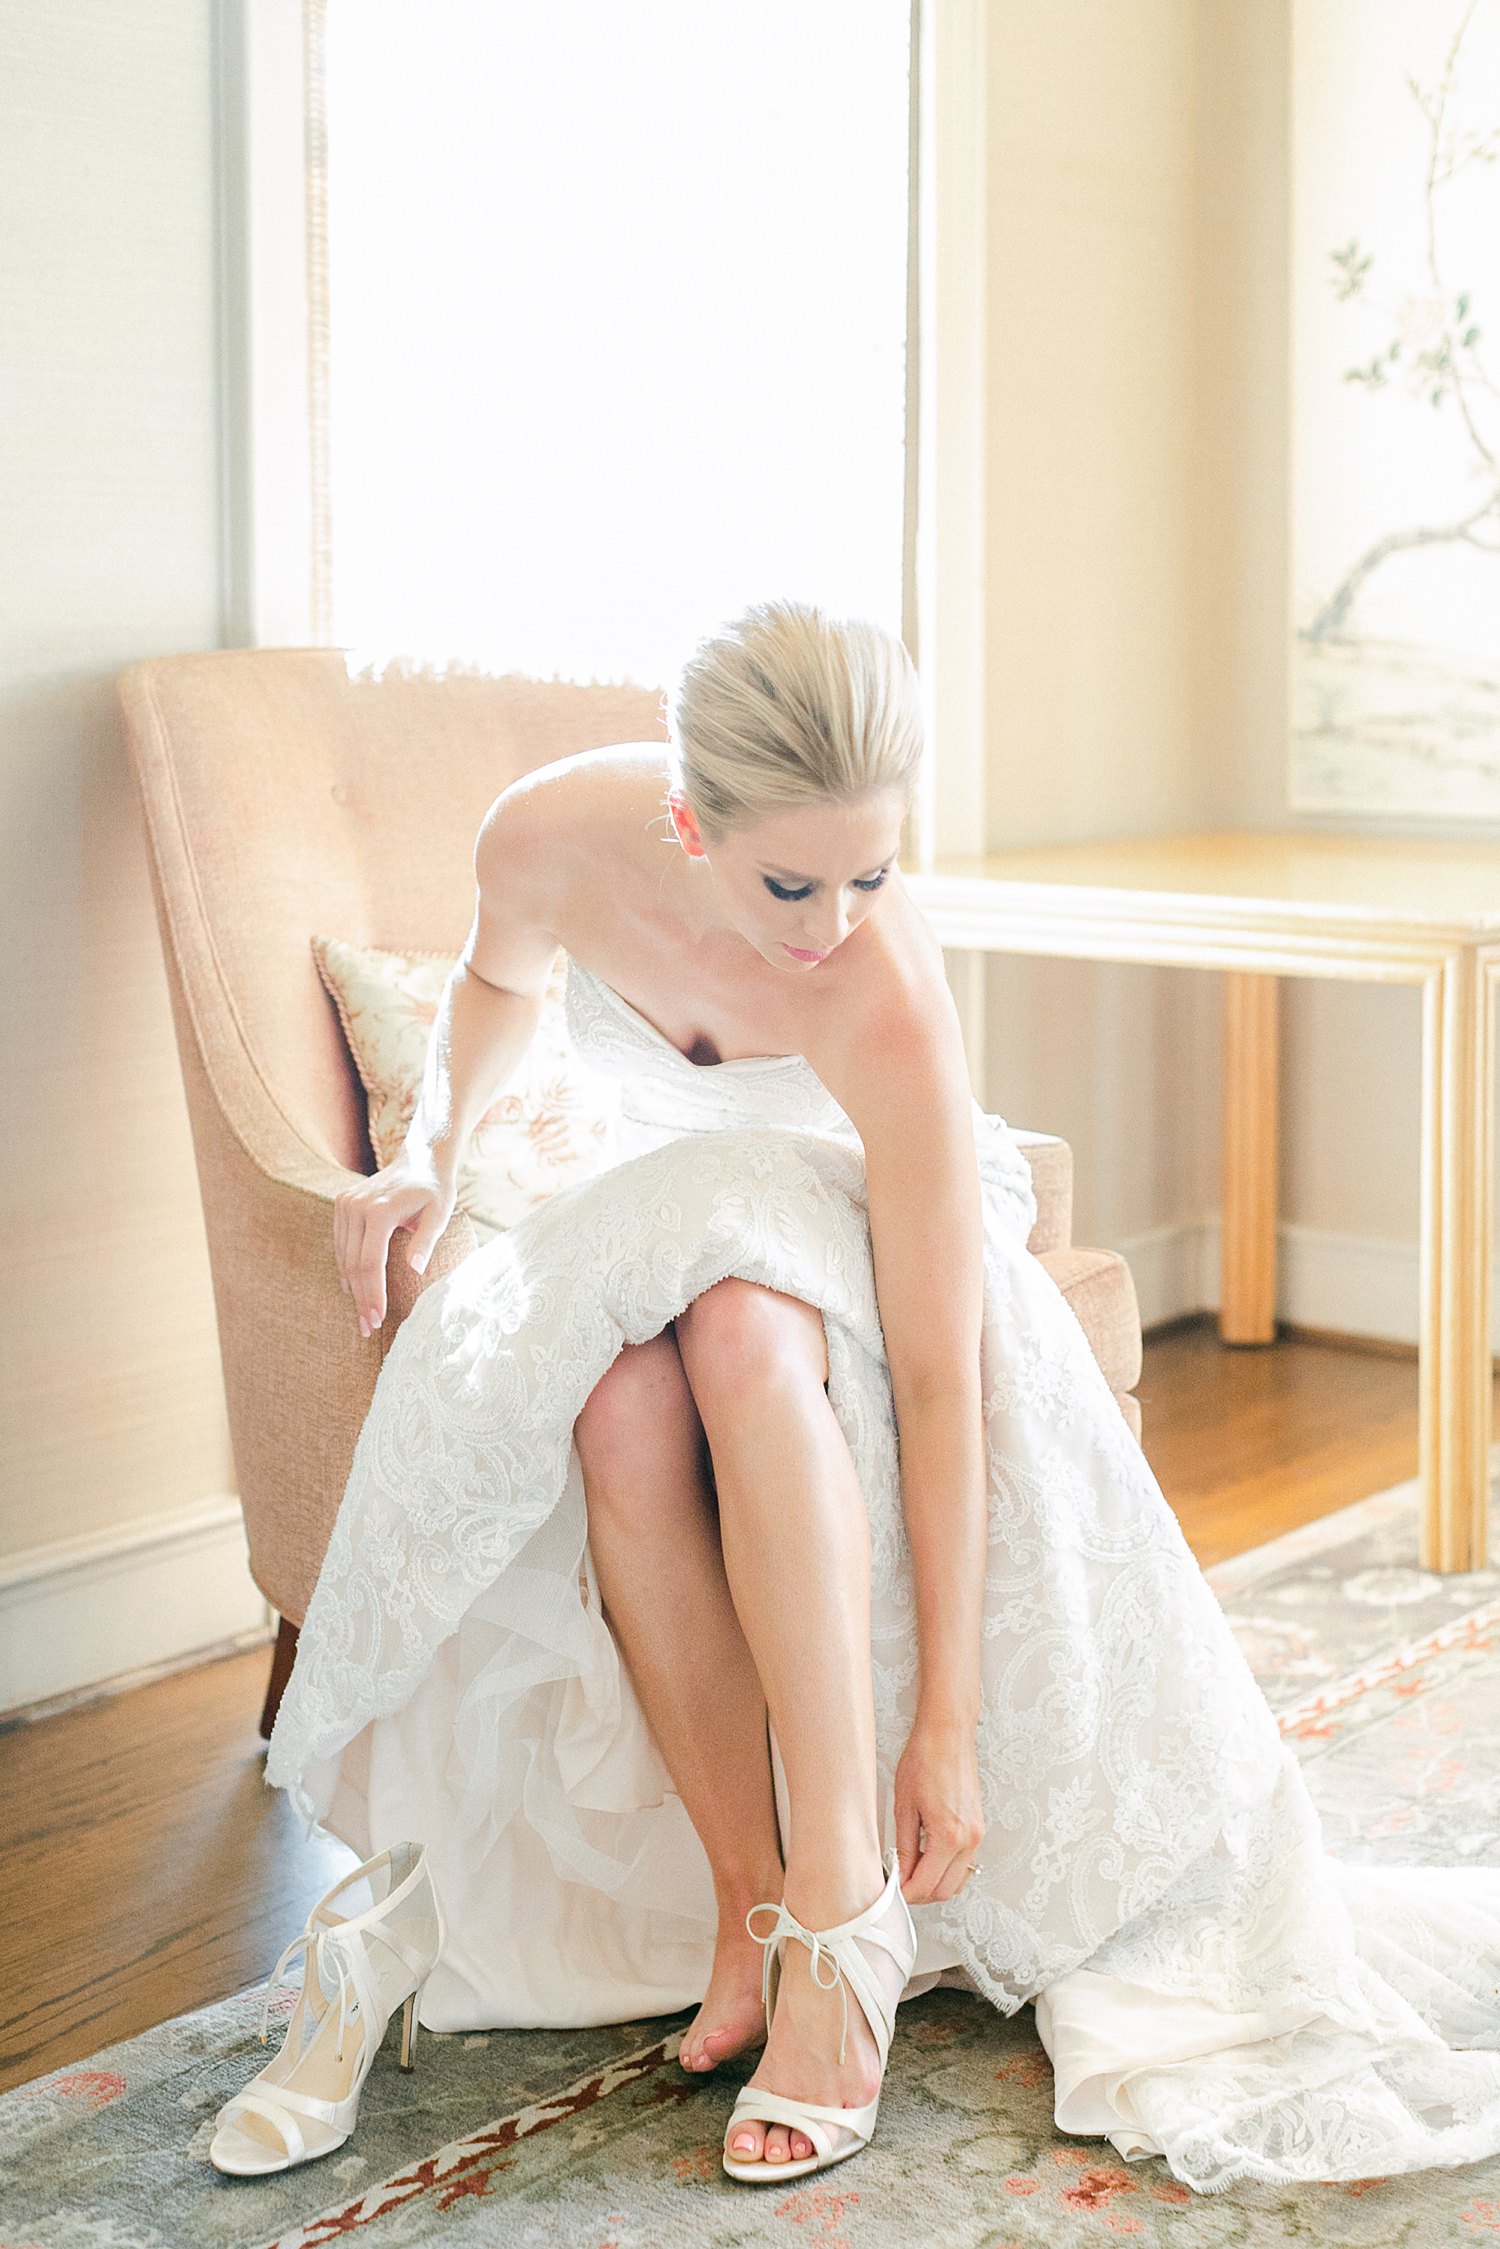 Bride sitting putting on white high heel shoes